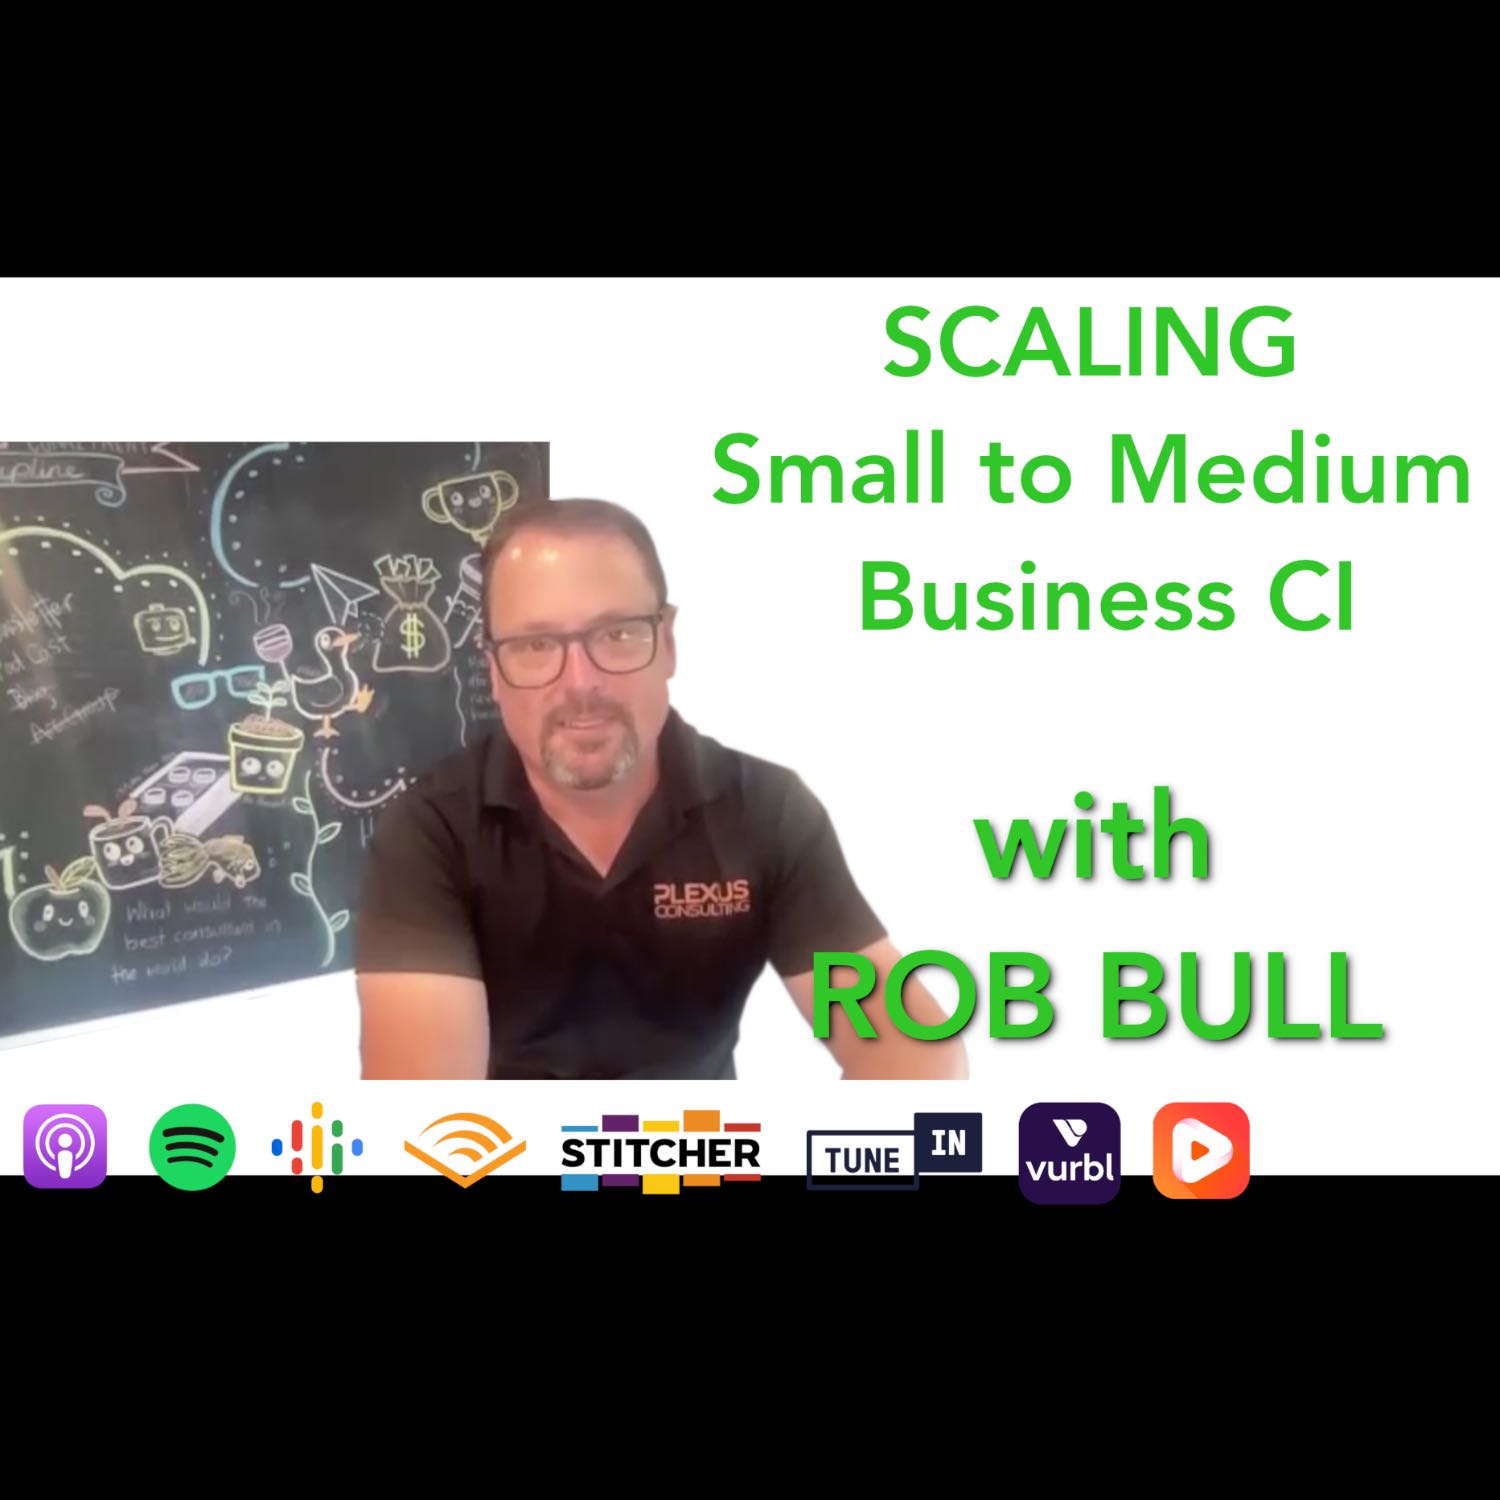 Scaling Small and Medium Business CI with Rob Bull